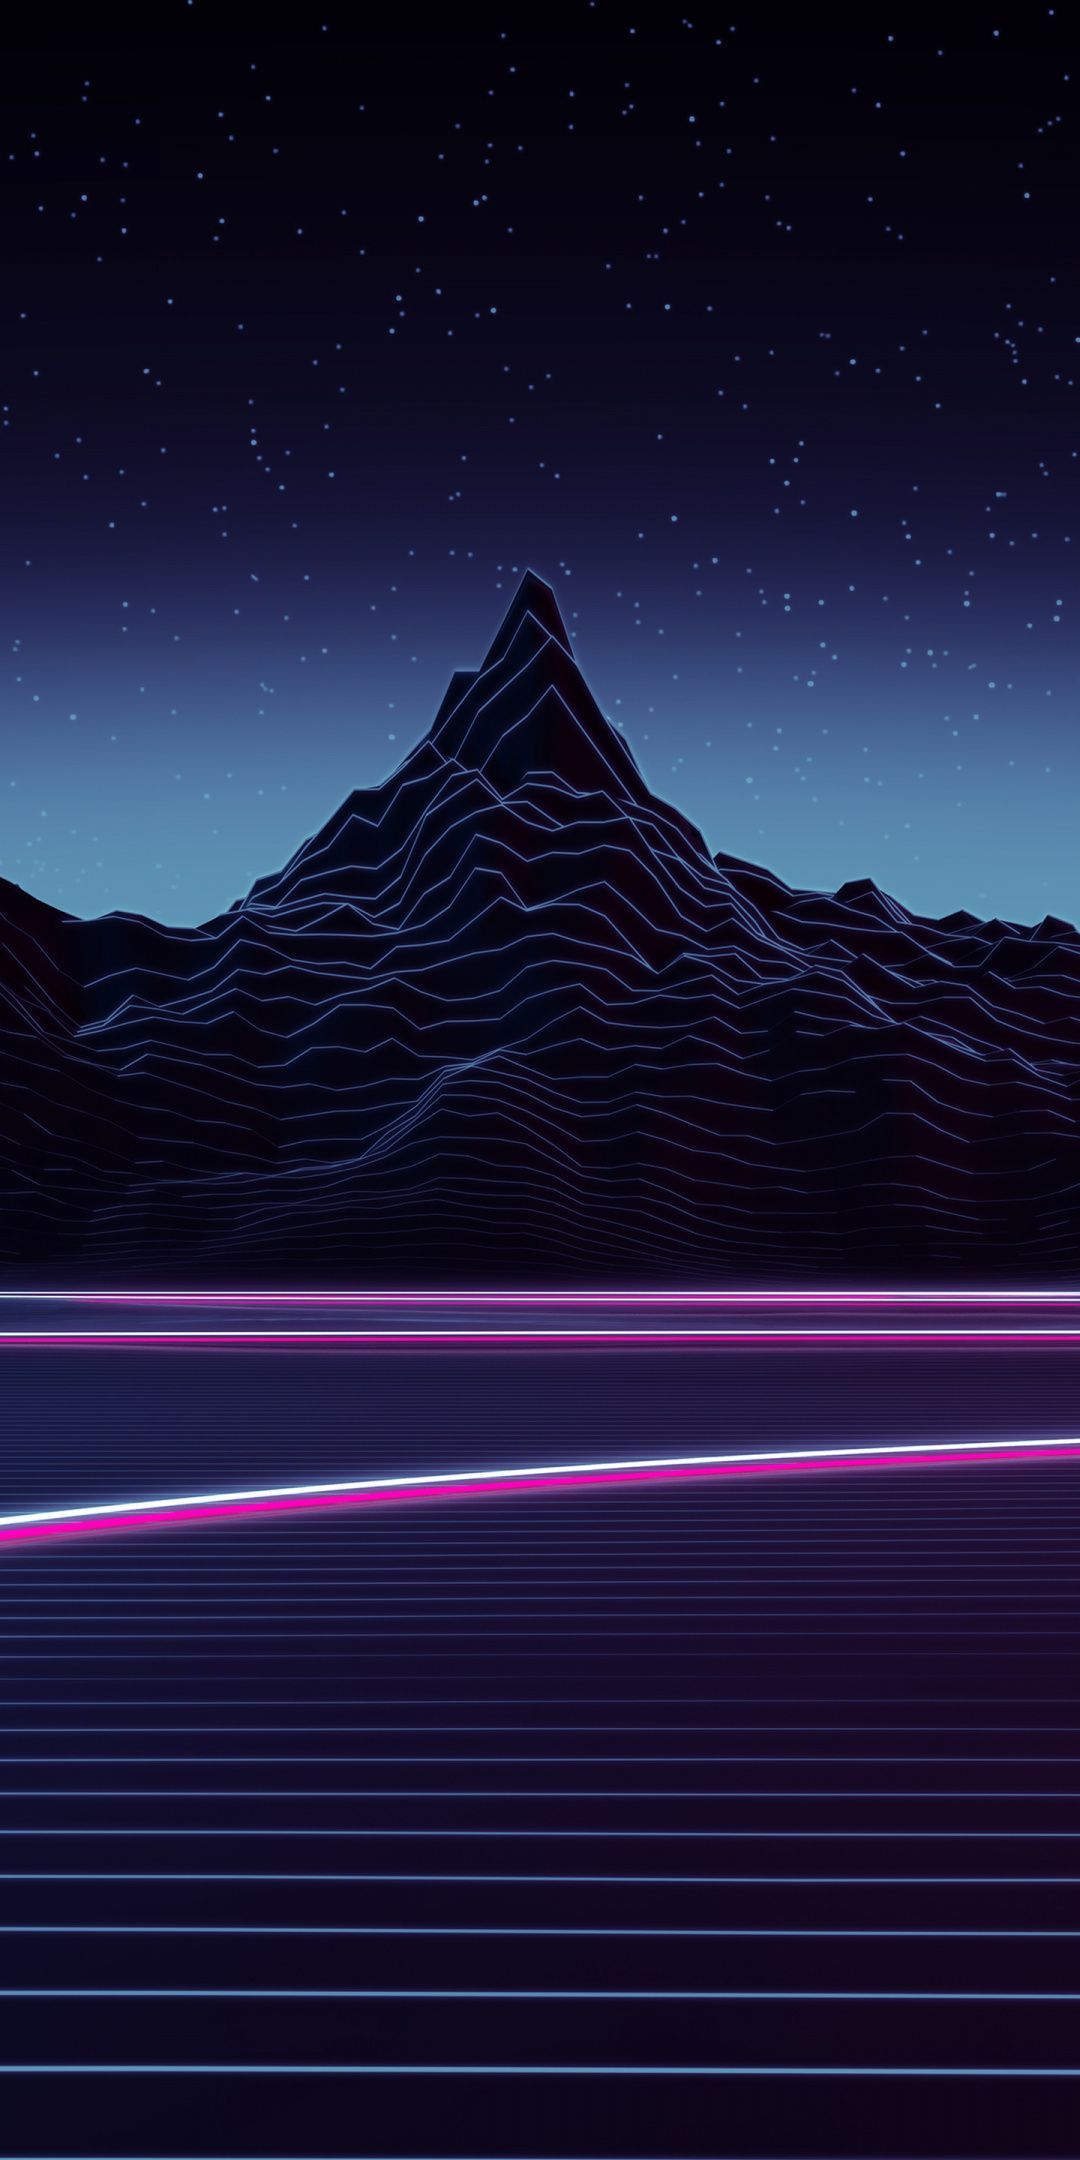 Neon, Highway, mountains, landscape, 1080x2160 wallpaper. Abstract iphone wallpaper, iPhone background wallpaper, Electricity poster